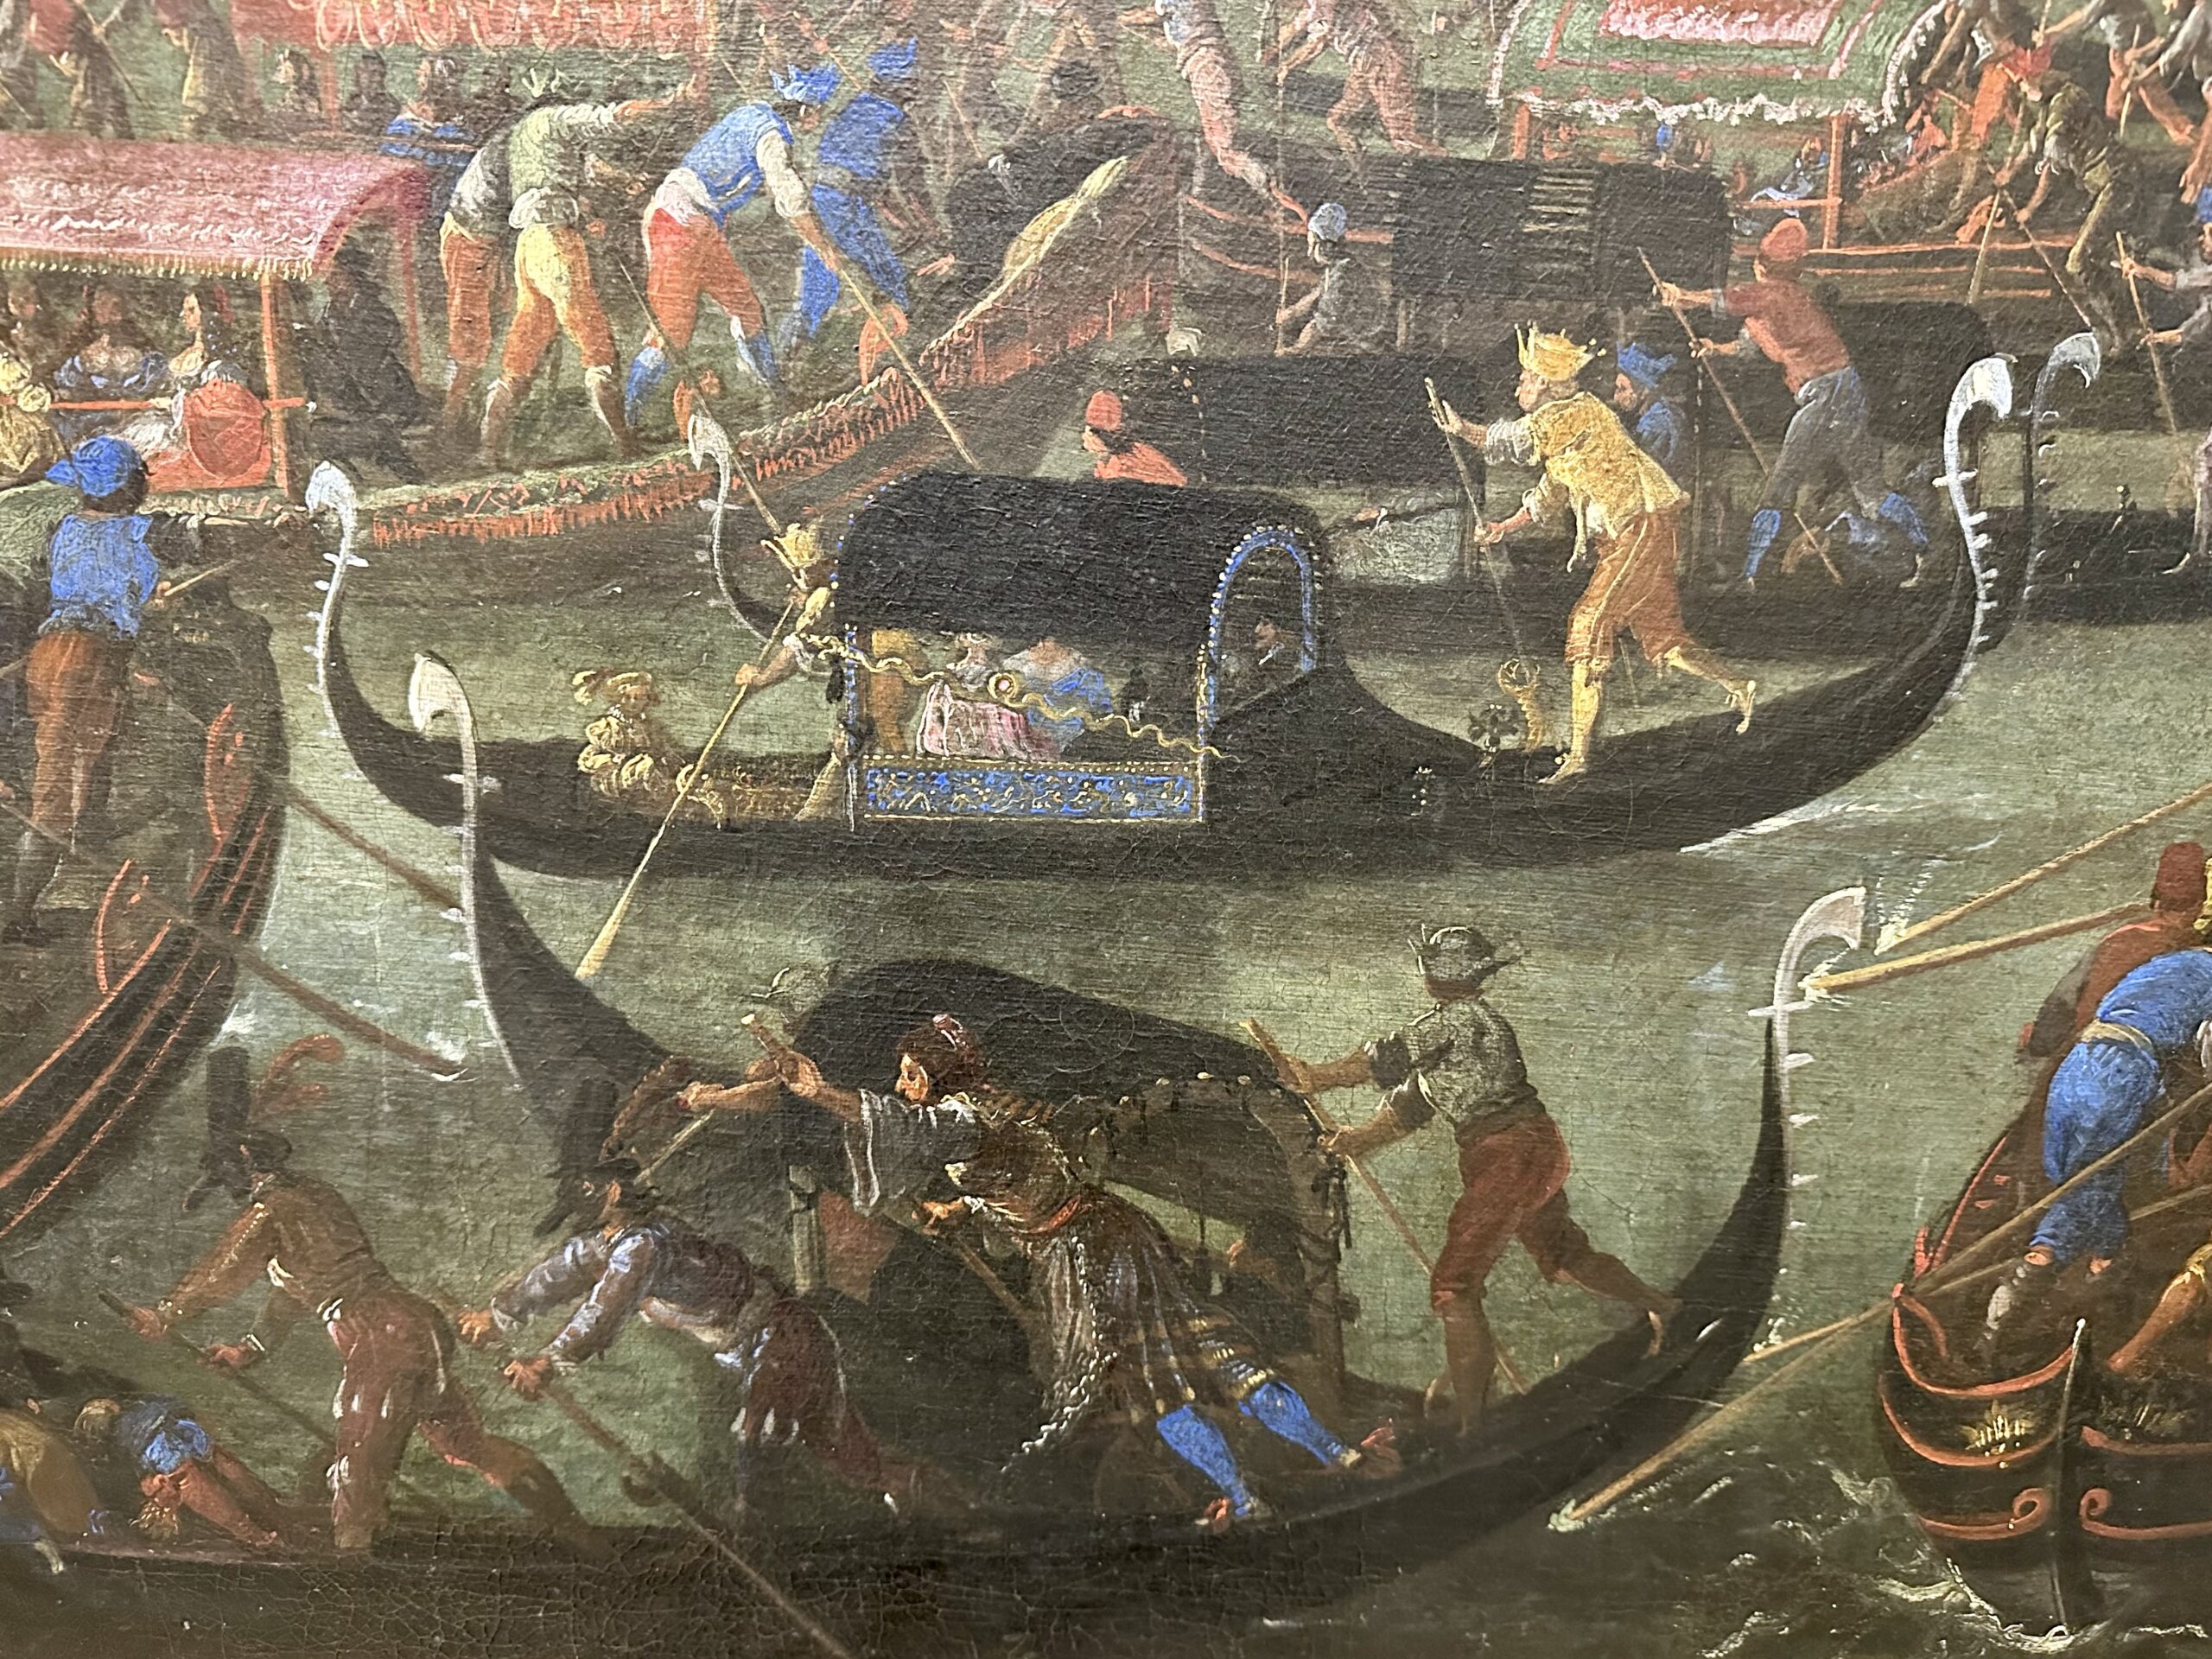 Detail of a painting showing gondolas in Venice in the 17th century